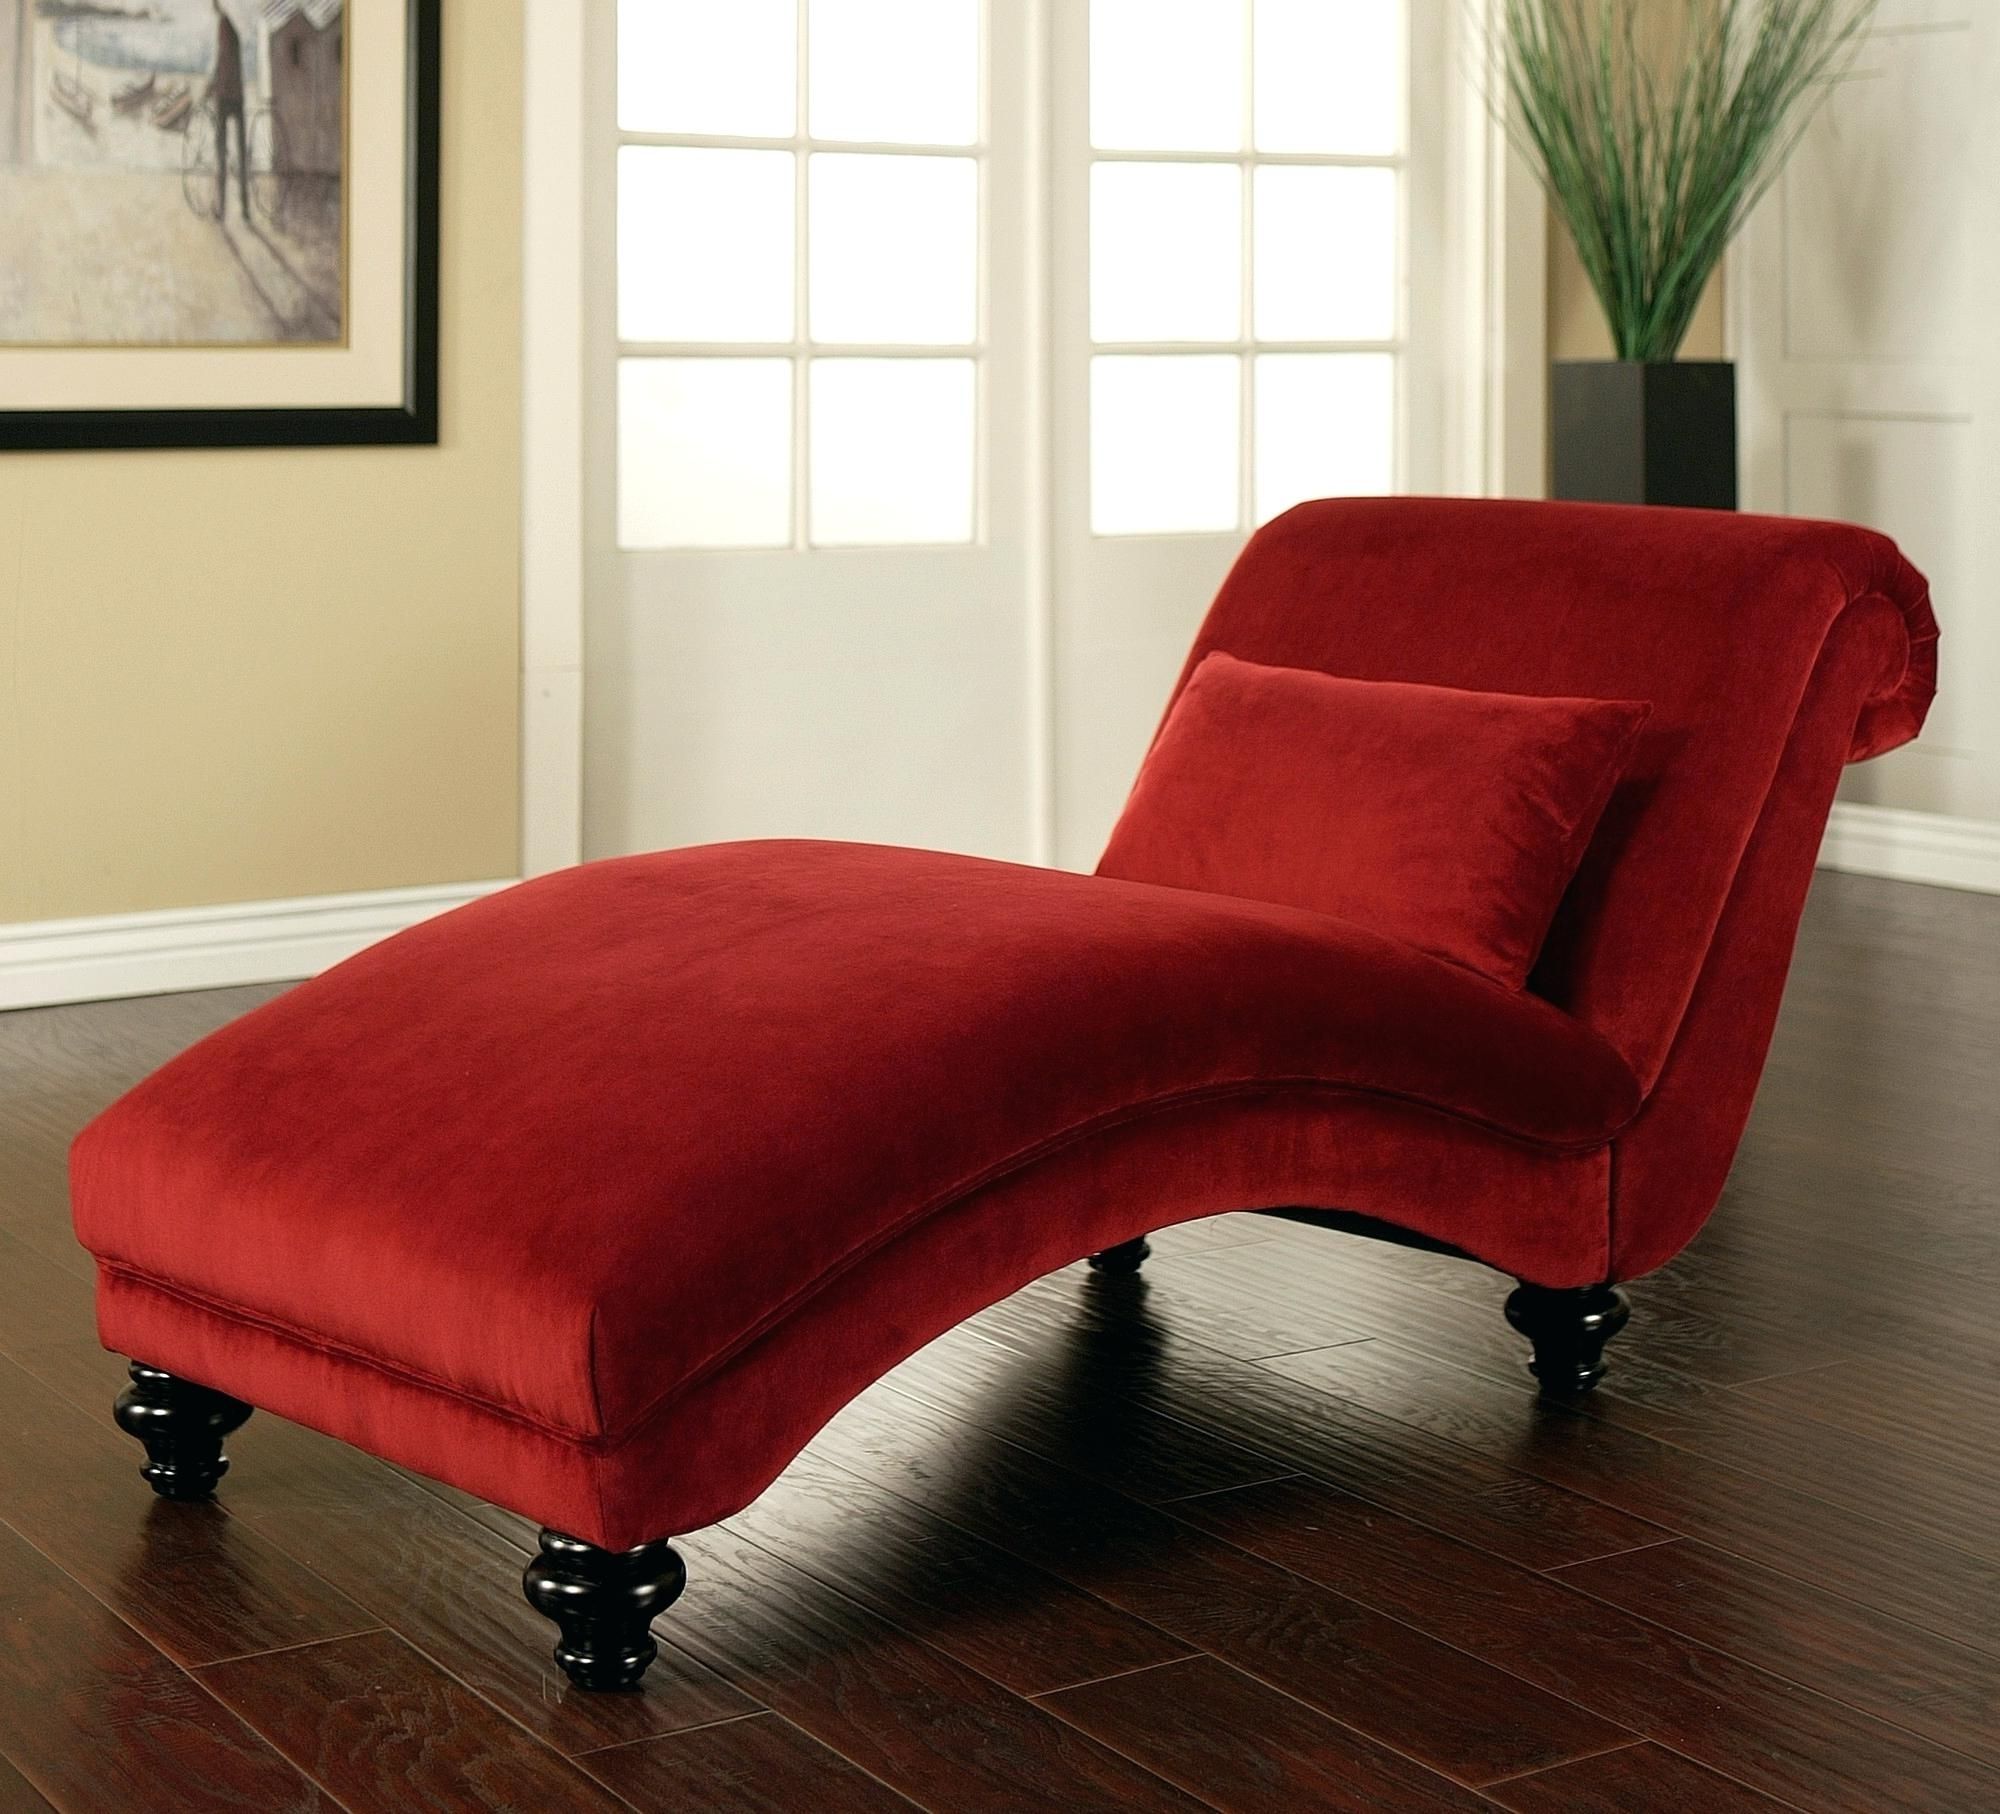 Well Known Curved Chaise Lounges For Best Ideas Of Chaise Lounge Red On Chaise Lounges Minimalist (View 4 of 15)